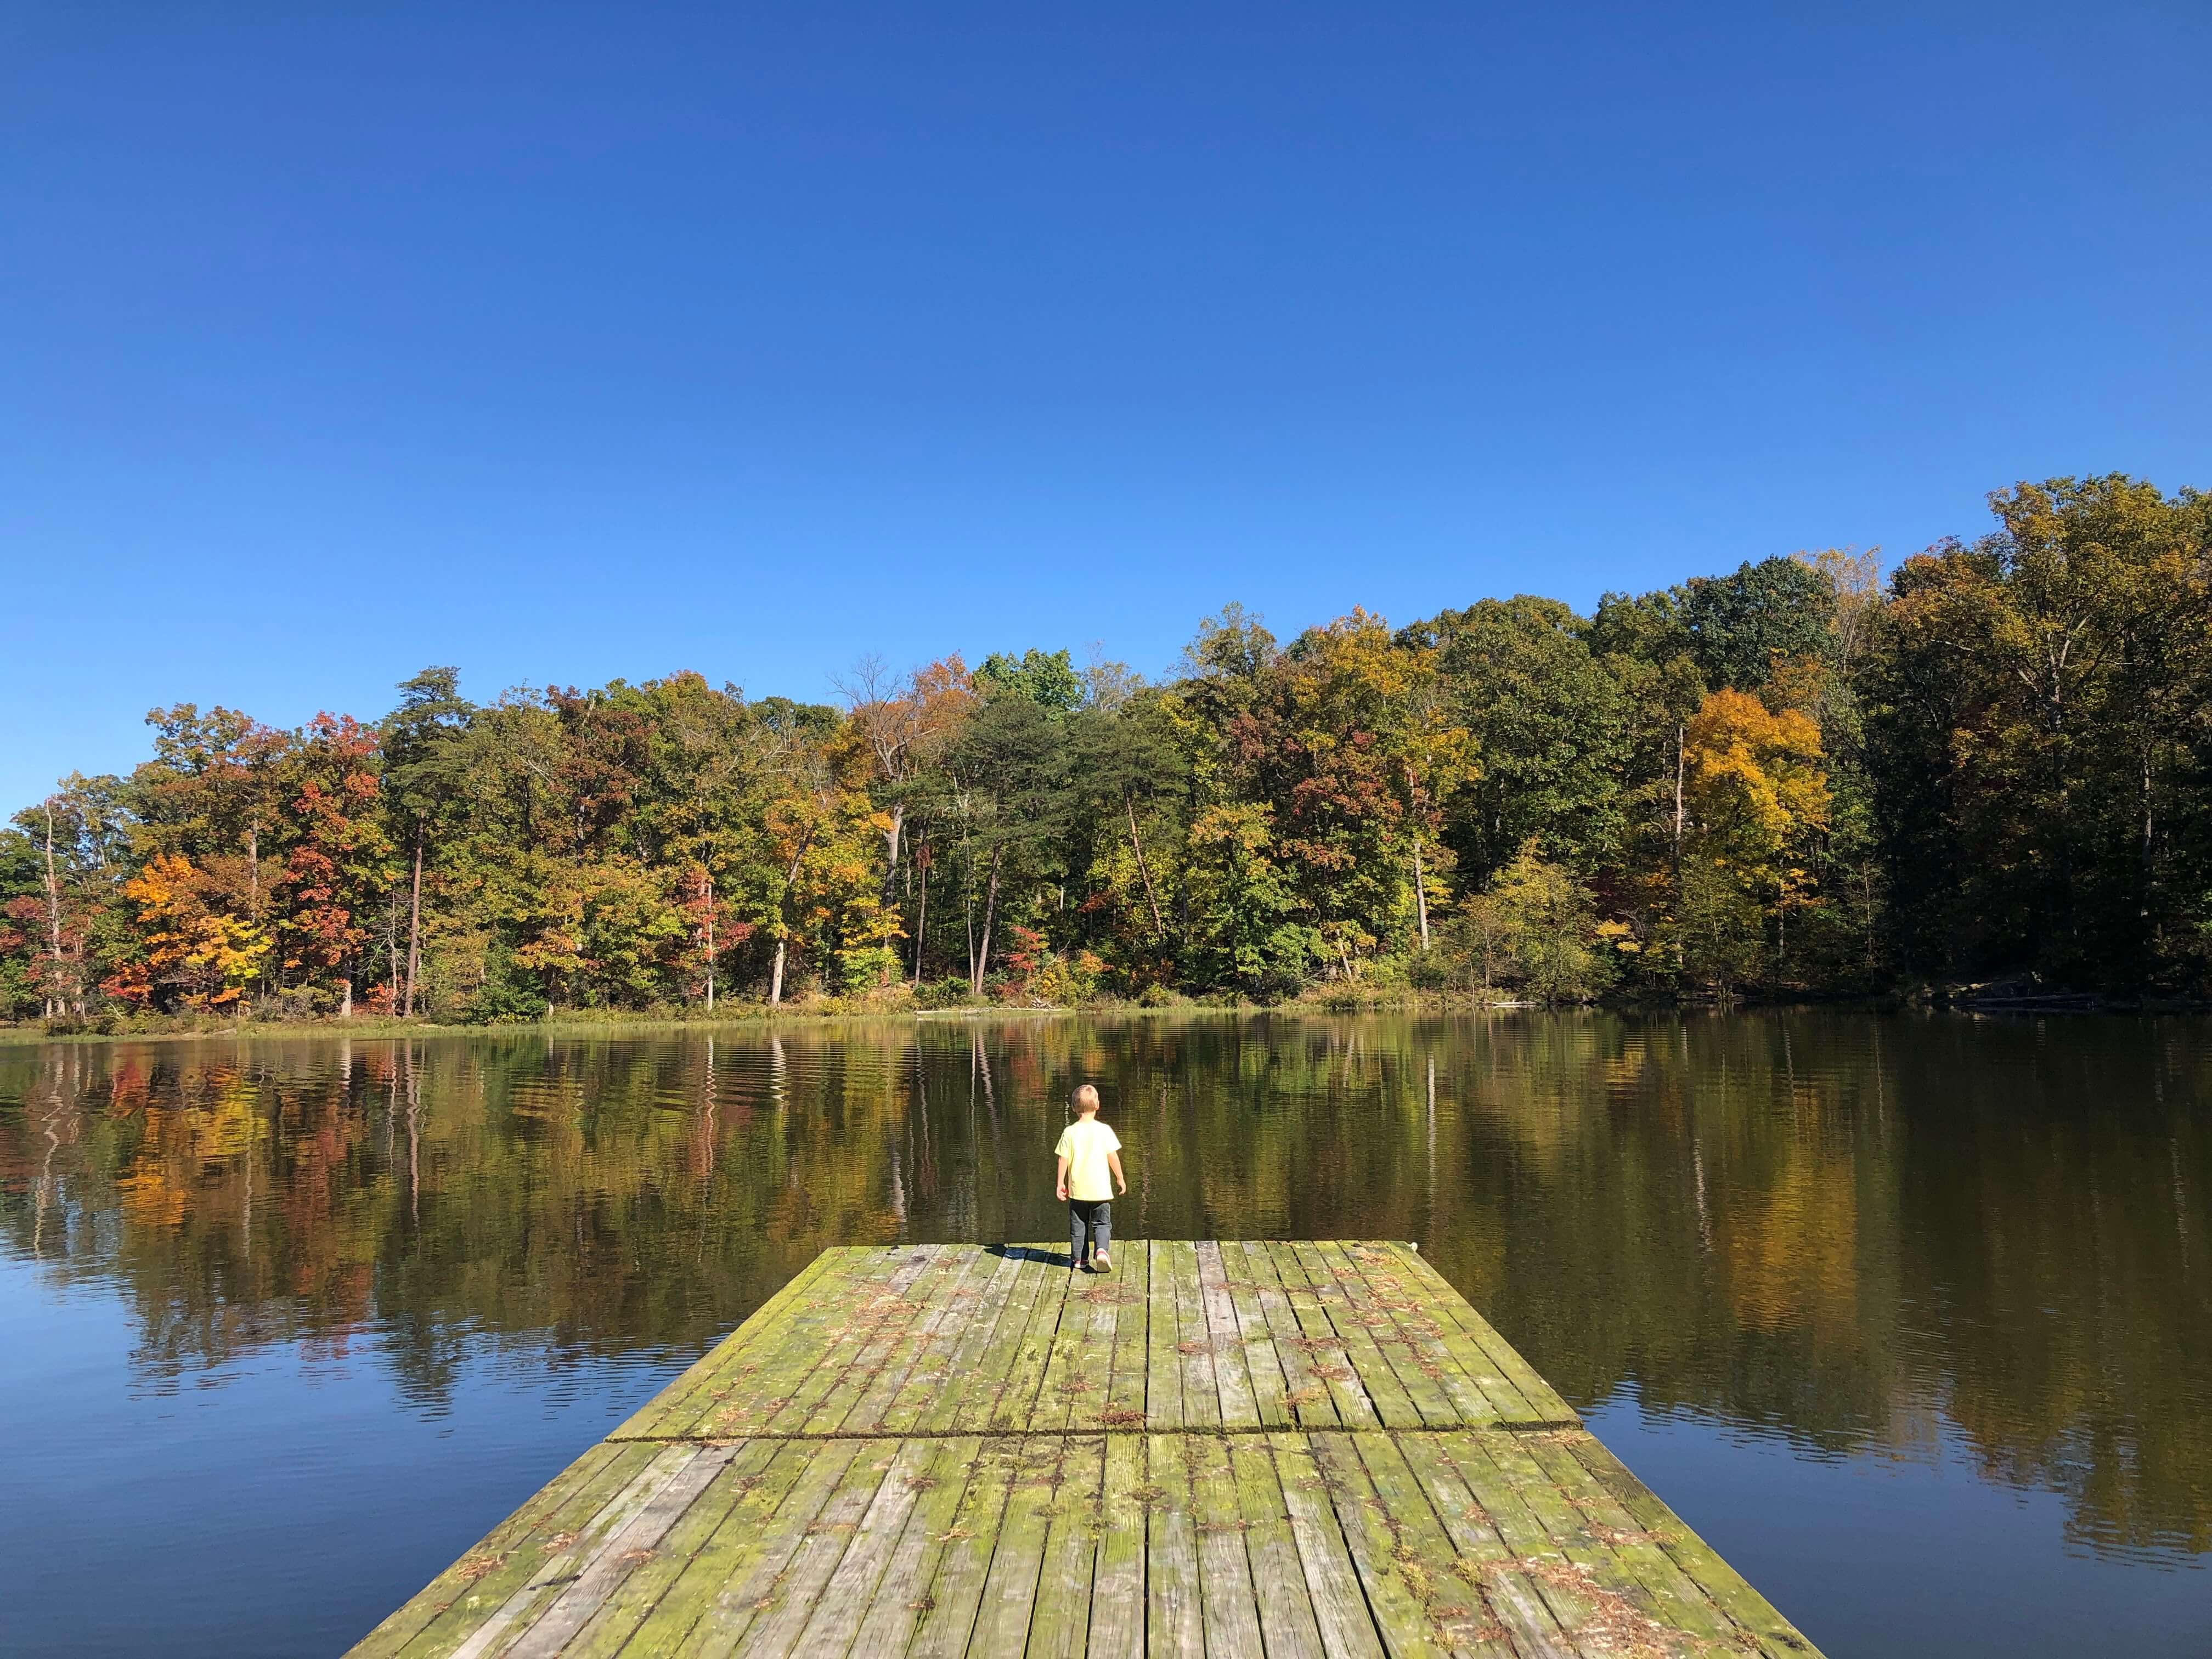 a young boy waits at the end of a dock overlooking a lake on a fall day